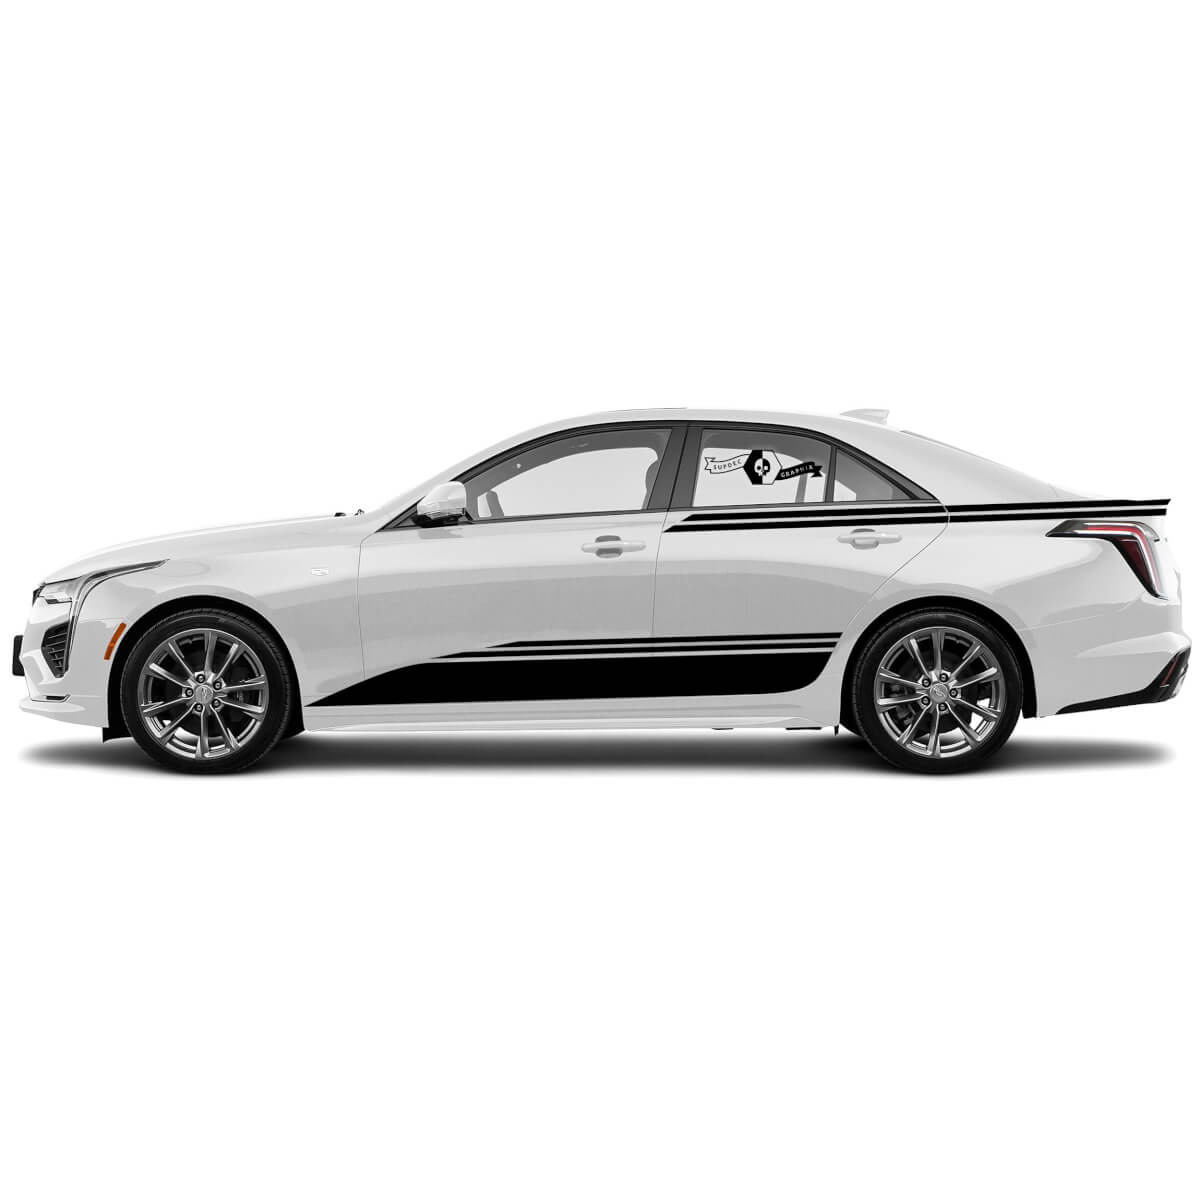 Kit of New Decal Door Classic Sticker Stripe and sede Accent Wide for Cadillac CT4